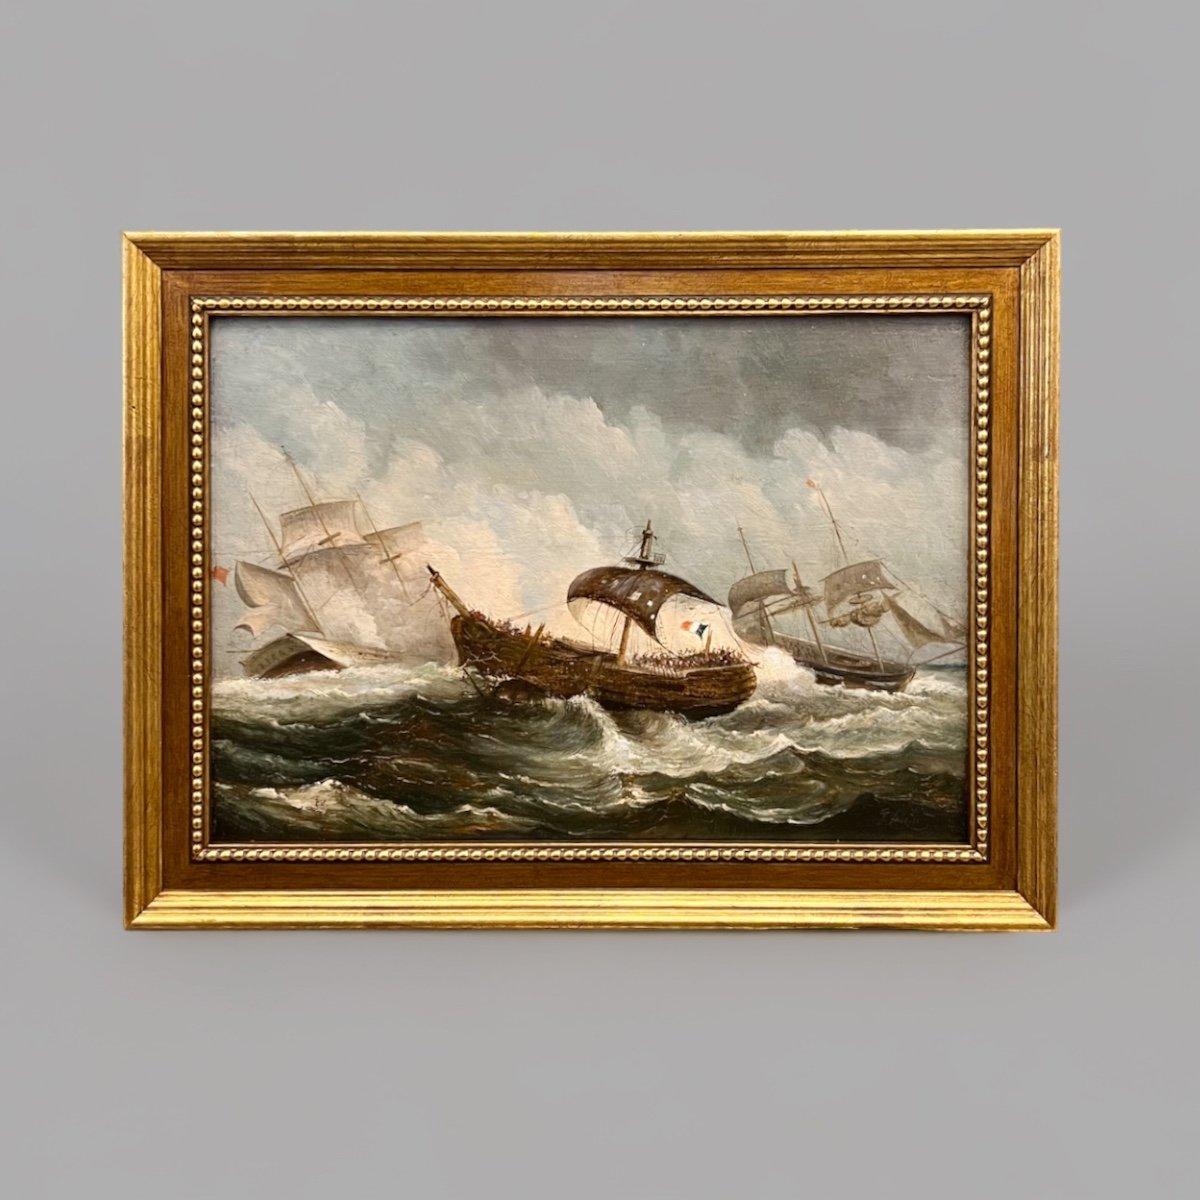 This wonderful oil painting represents a beautiful composition of a naval battle featuring a French ship in the foreground. The colours used and the graphic dynamism of the artwork adds a layer of both ruggedness and liveliness to the scene. 